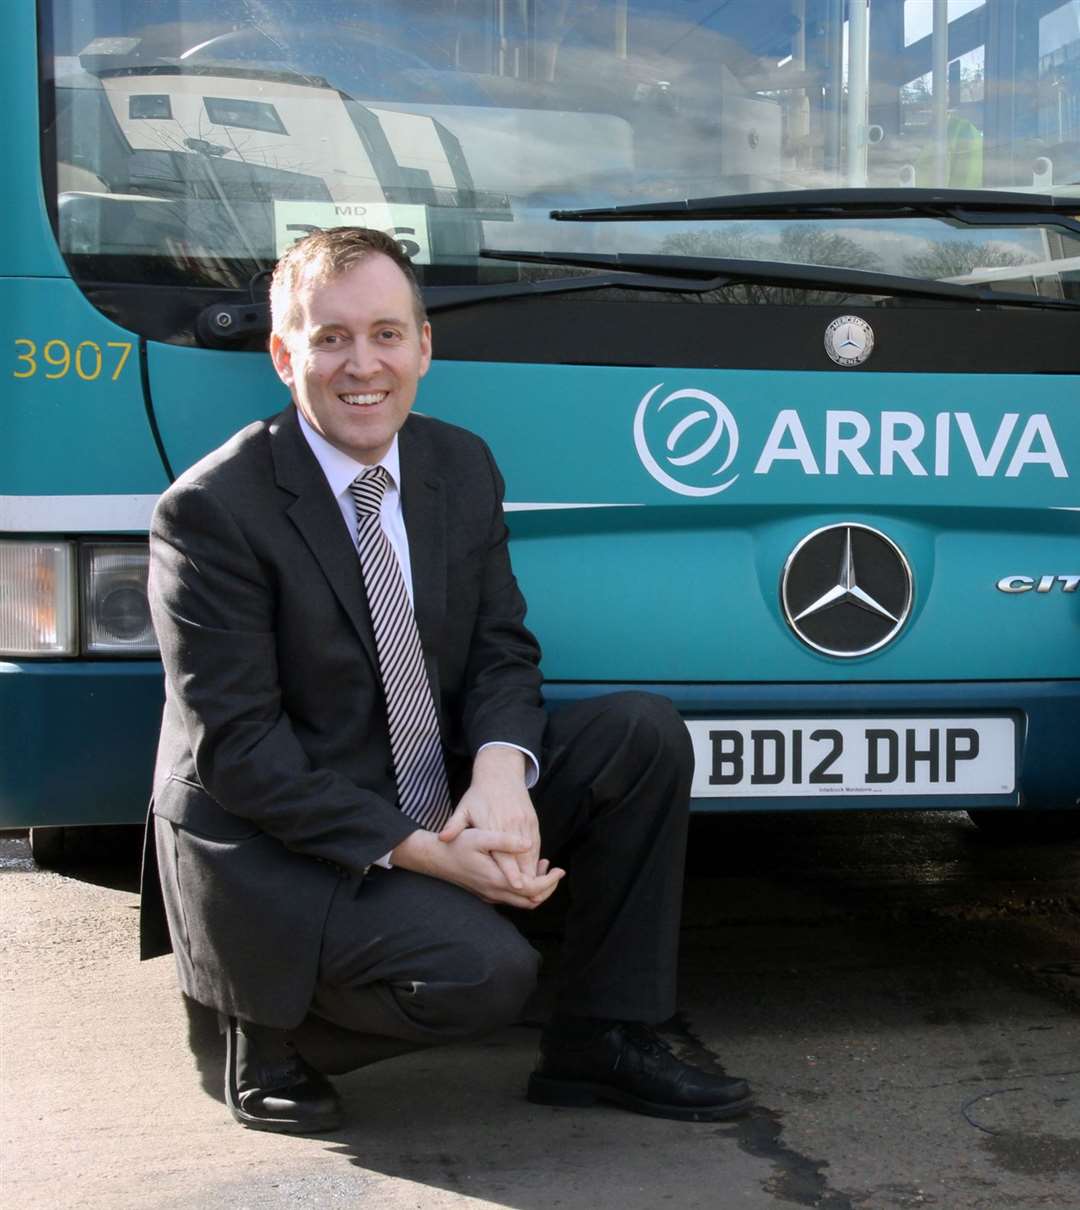 Area Manager director at Arriva, Oliver Monahan